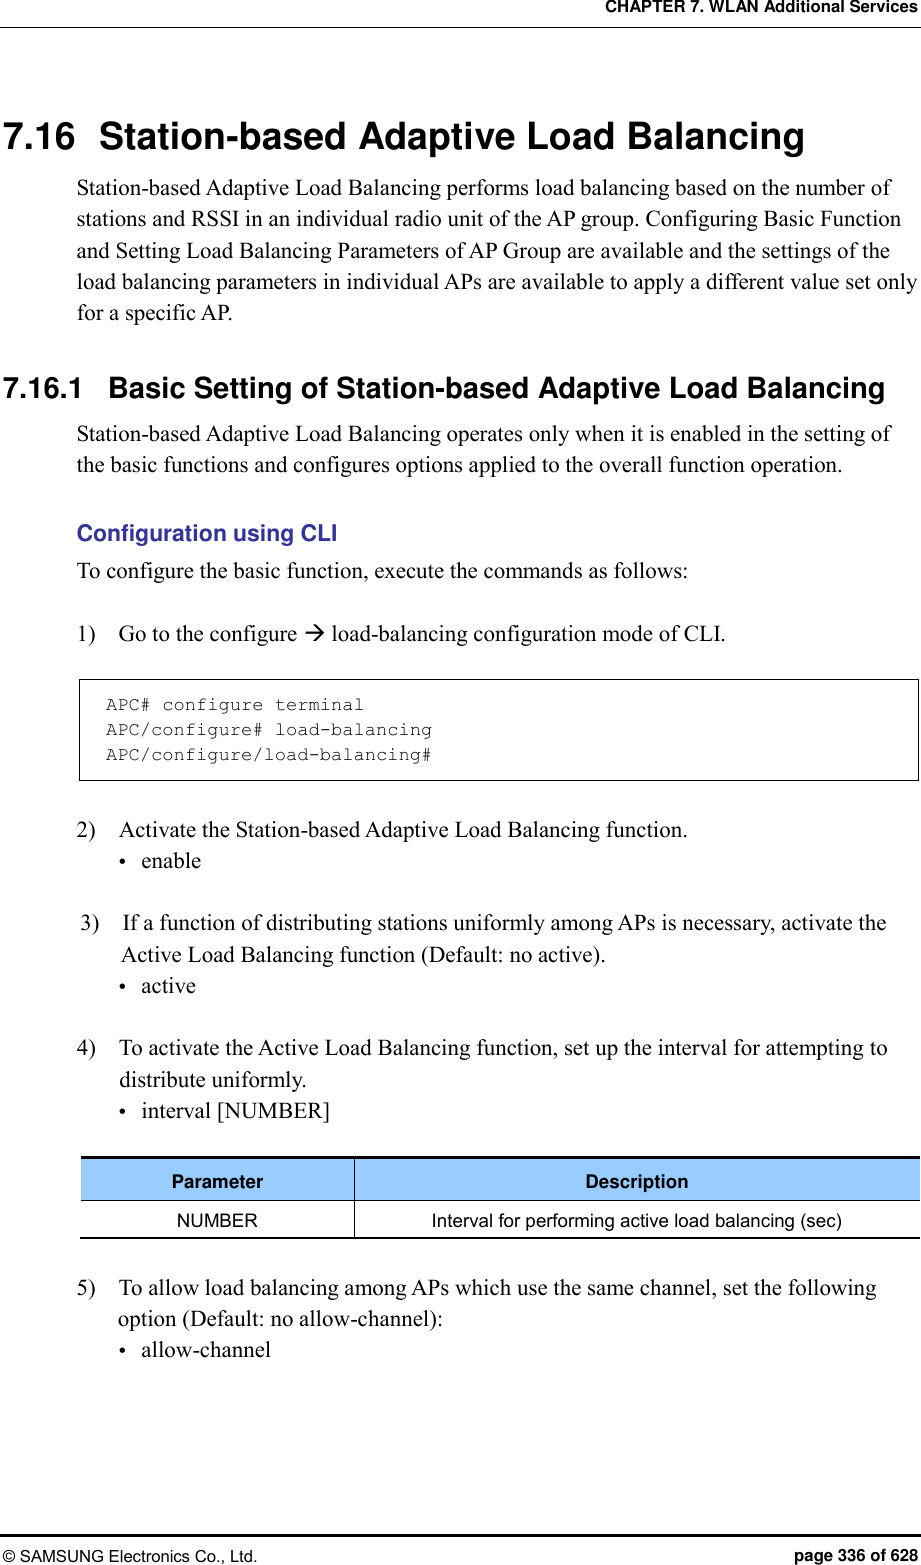 CHAPTER 7. WLAN Additional Services © SAMSUNG Electronics Co., Ltd.  page 336 of 628 7.16  Station-based Adaptive Load Balancing Station-based Adaptive Load Balancing performs load balancing based on the number of stations and RSSI in an individual radio unit of the AP group. Configuring Basic Function and Setting Load Balancing Parameters of AP Group are available and the settings of the load balancing parameters in individual APs are available to apply a different value set only for a specific AP.  7.16.1  Basic Setting of Station-based Adaptive Load Balancing Station-based Adaptive Load Balancing operates only when it is enabled in the setting of the basic functions and configures options applied to the overall function operation.  Configuration using CLI To configure the basic function, execute the commands as follows:  1)    Go to the configure  load-balancing configuration mode of CLI.  APC# configure terminal APC/configure# load-balancing APC/configure/load-balancing#  2)    Activate the Station-based Adaptive Load Balancing function.  enable  3)    If a function of distributing stations uniformly among APs is necessary, activate the Active Load Balancing function (Default: no active).  active  4)    To activate the Active Load Balancing function, set up the interval for attempting to distribute uniformly.  interval [NUMBER]  Parameter Description NUMBER Interval for performing active load balancing (sec)  5)    To allow load balancing among APs which use the same channel, set the following option (Default: no allow-channel):  allow-channel  